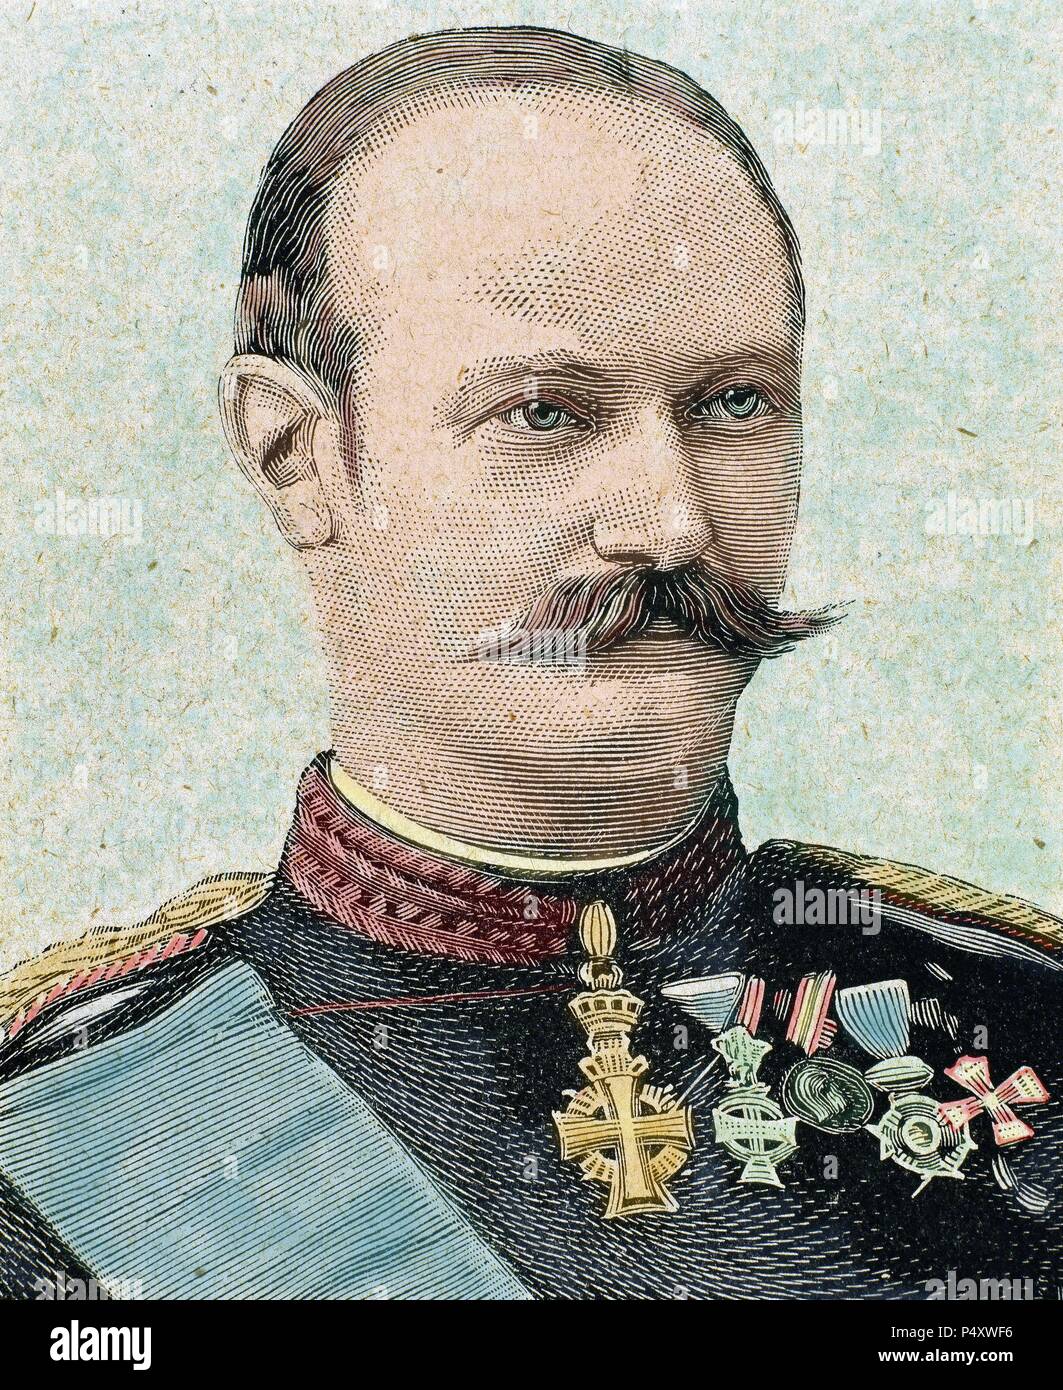 Frederick VIII (Christian Frederik Vilhelm Carl) (1843-1912). King of the Kingdom of Denmark from 1906 to 1912. The second Danish monarch of the House of Glucksburg. Portrait. Colored engraving. Stock Photo